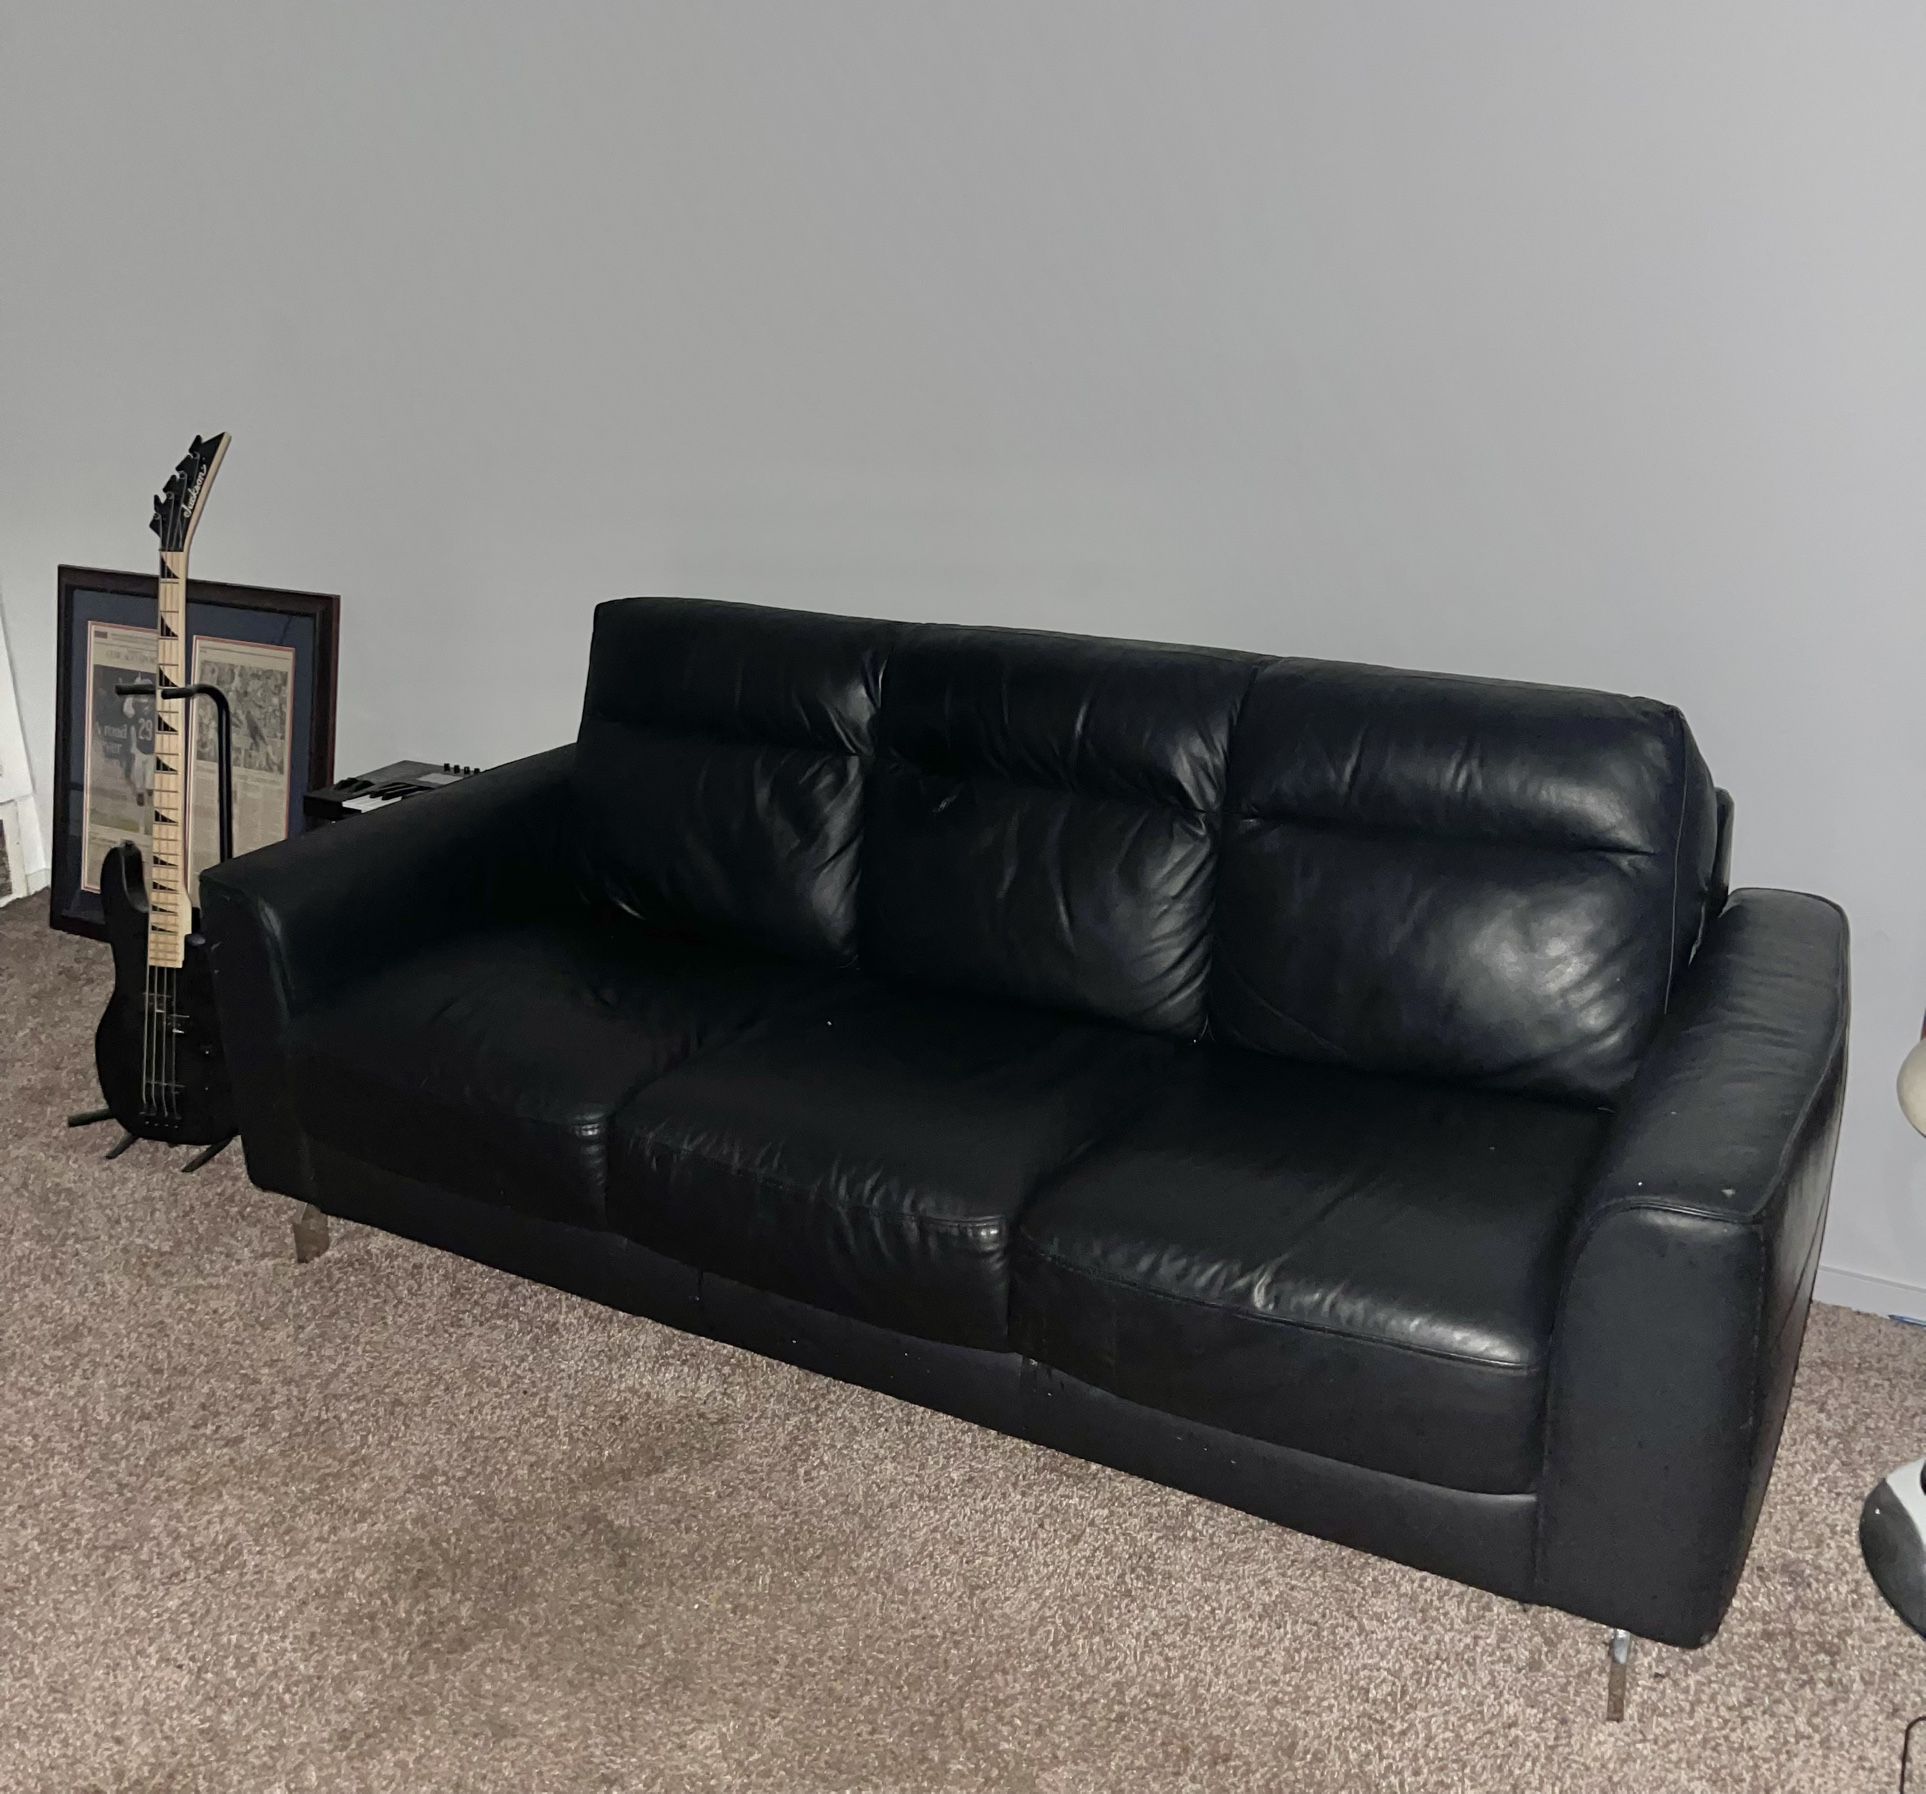 PRICE DROP! 3 Seater Black Leather Couch! 